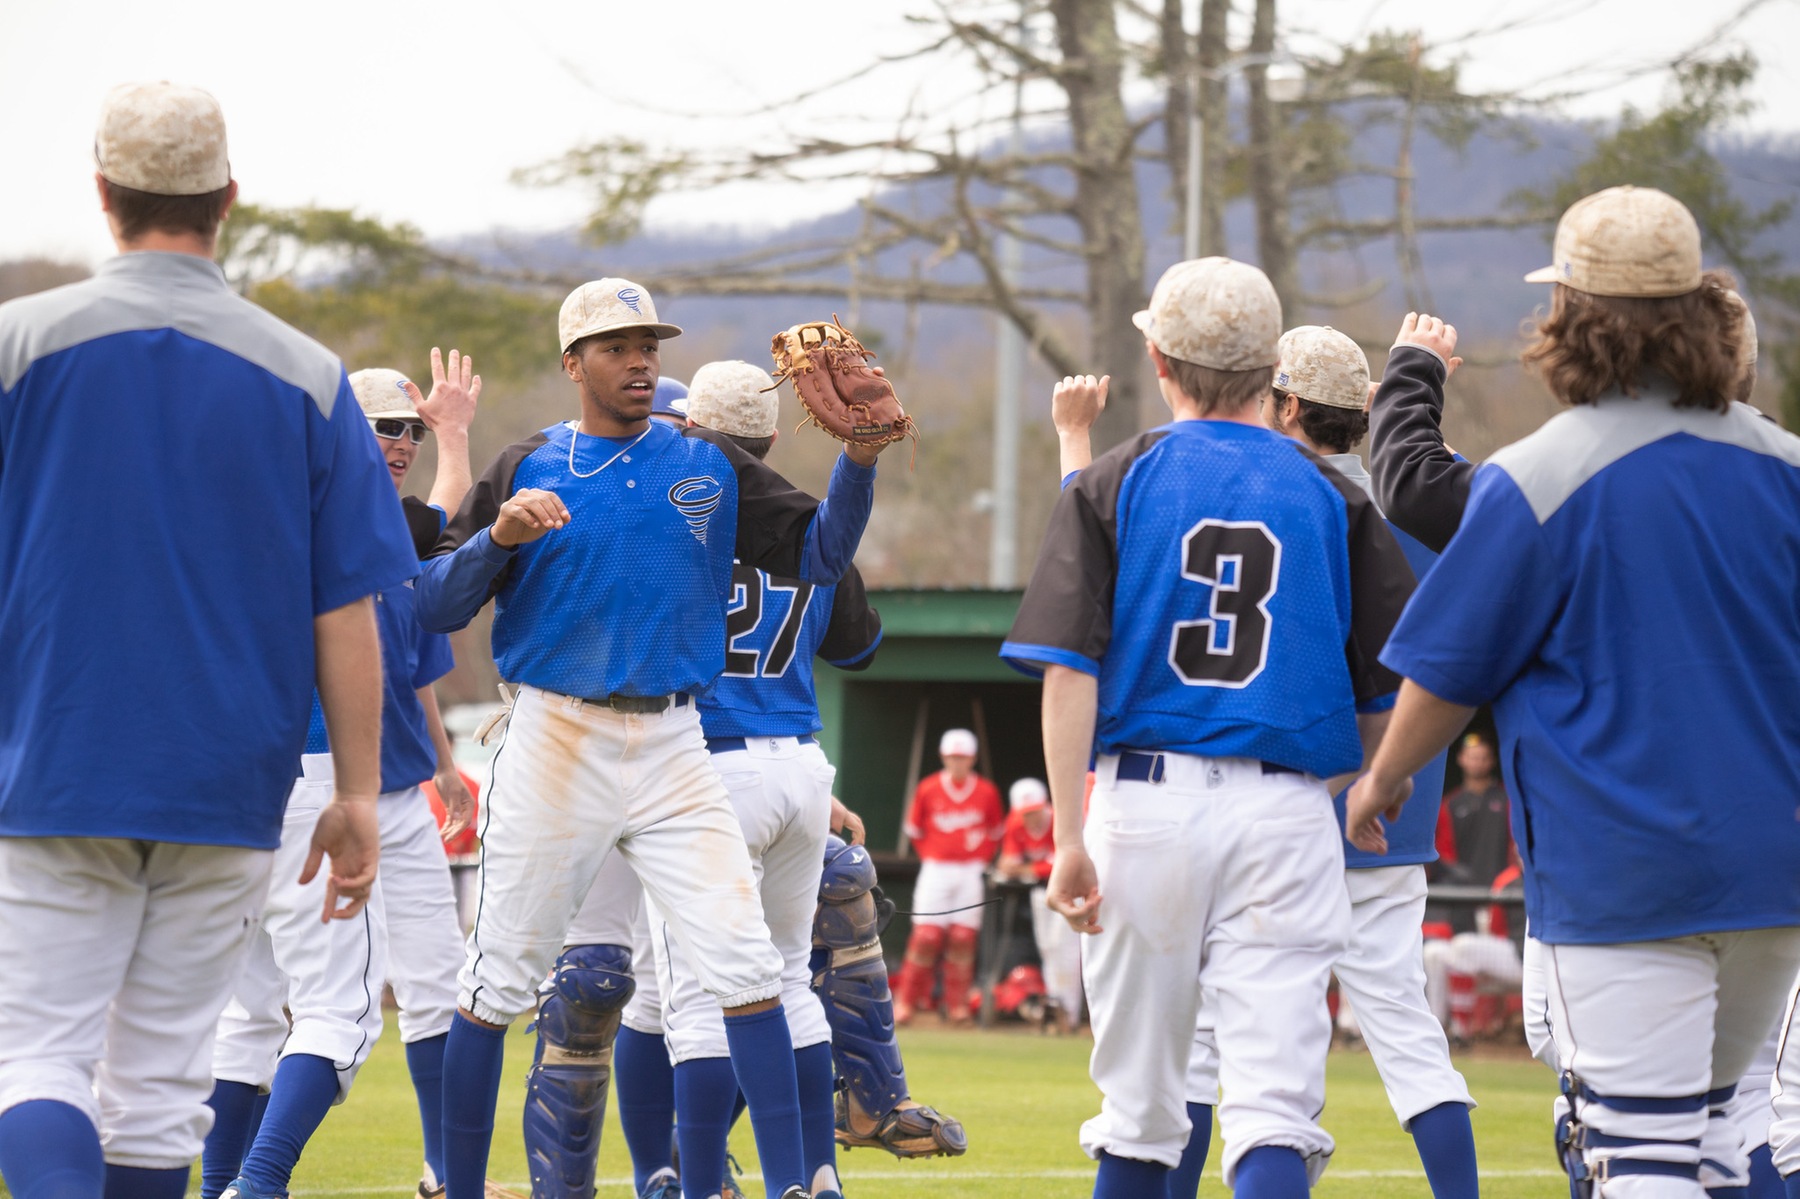 Brevard Holds Off Covenant to Claim Victory at Big League Camp, 5-4